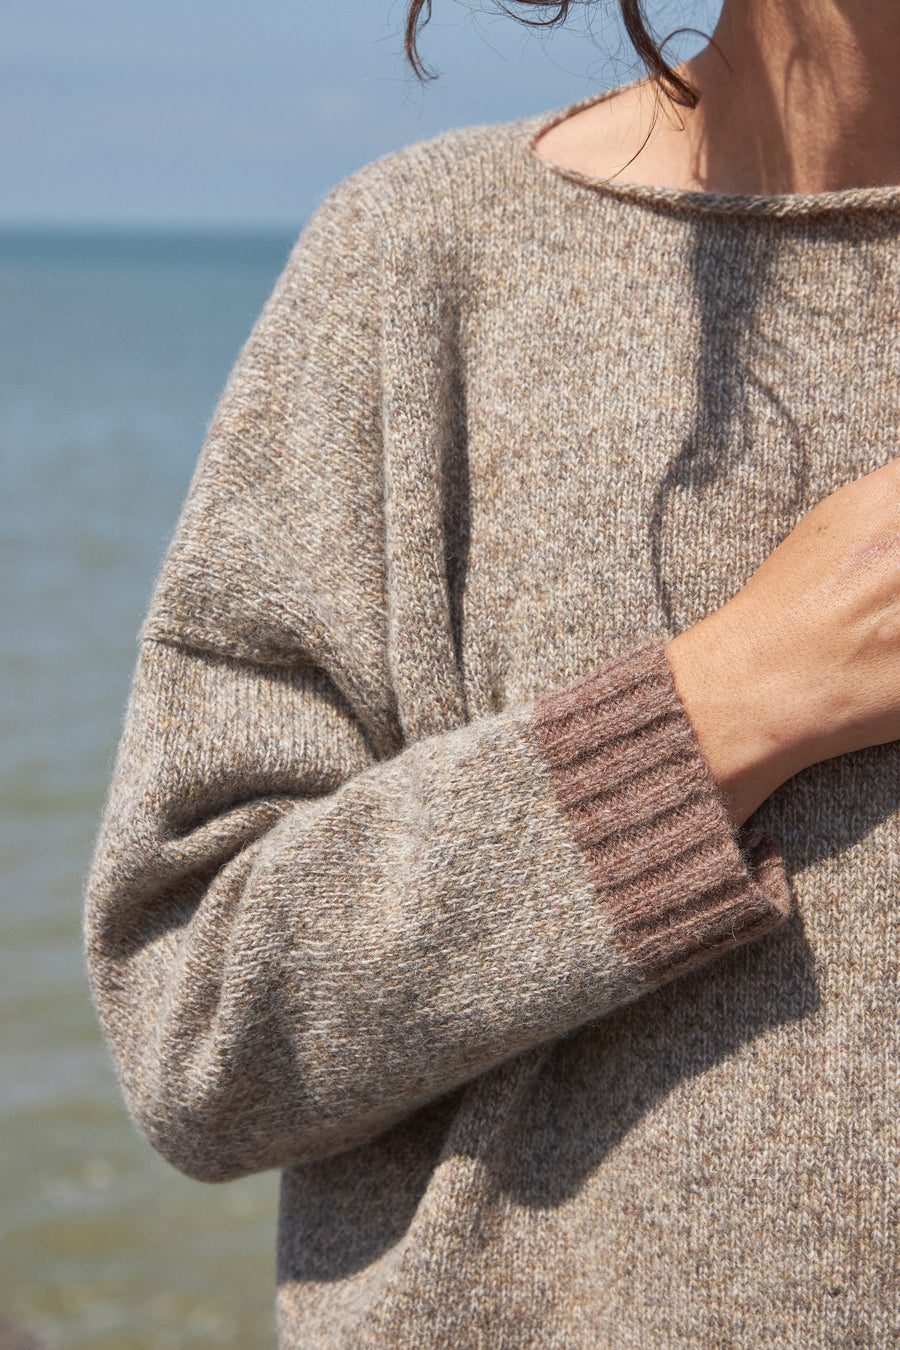 Woman wearing an oversized boxy wool jumper, stood by the seaside in Margate. Hand knitted jumper, made by British indie brand. Displaying pure 100 percent soft wool knitwear for best capsule winter wardrobe. Baggy fit, in marl brown and natural merino lambswool. Affordable sustainable knitwear made by ethical brand Rove knitwear.